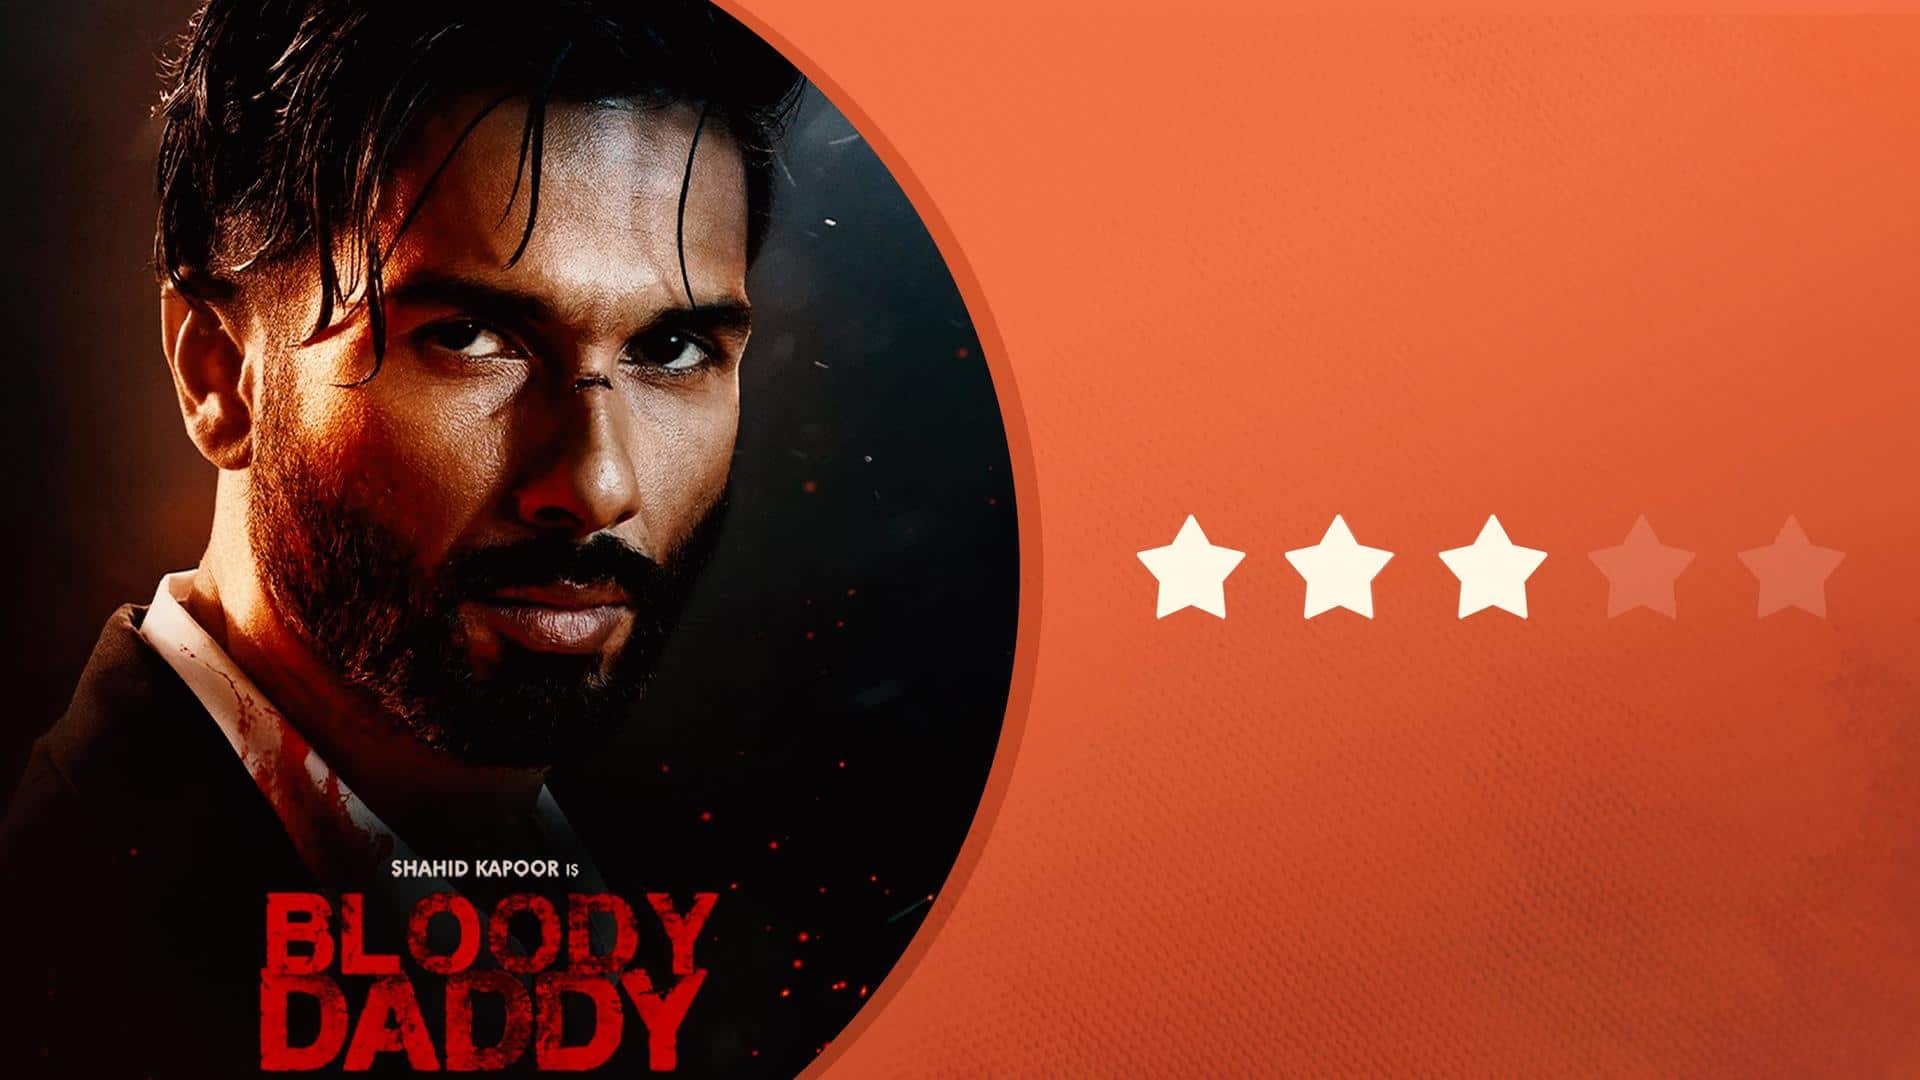 'Bloody Daddy' review: Shahid's action-thriller should've been released in theaters